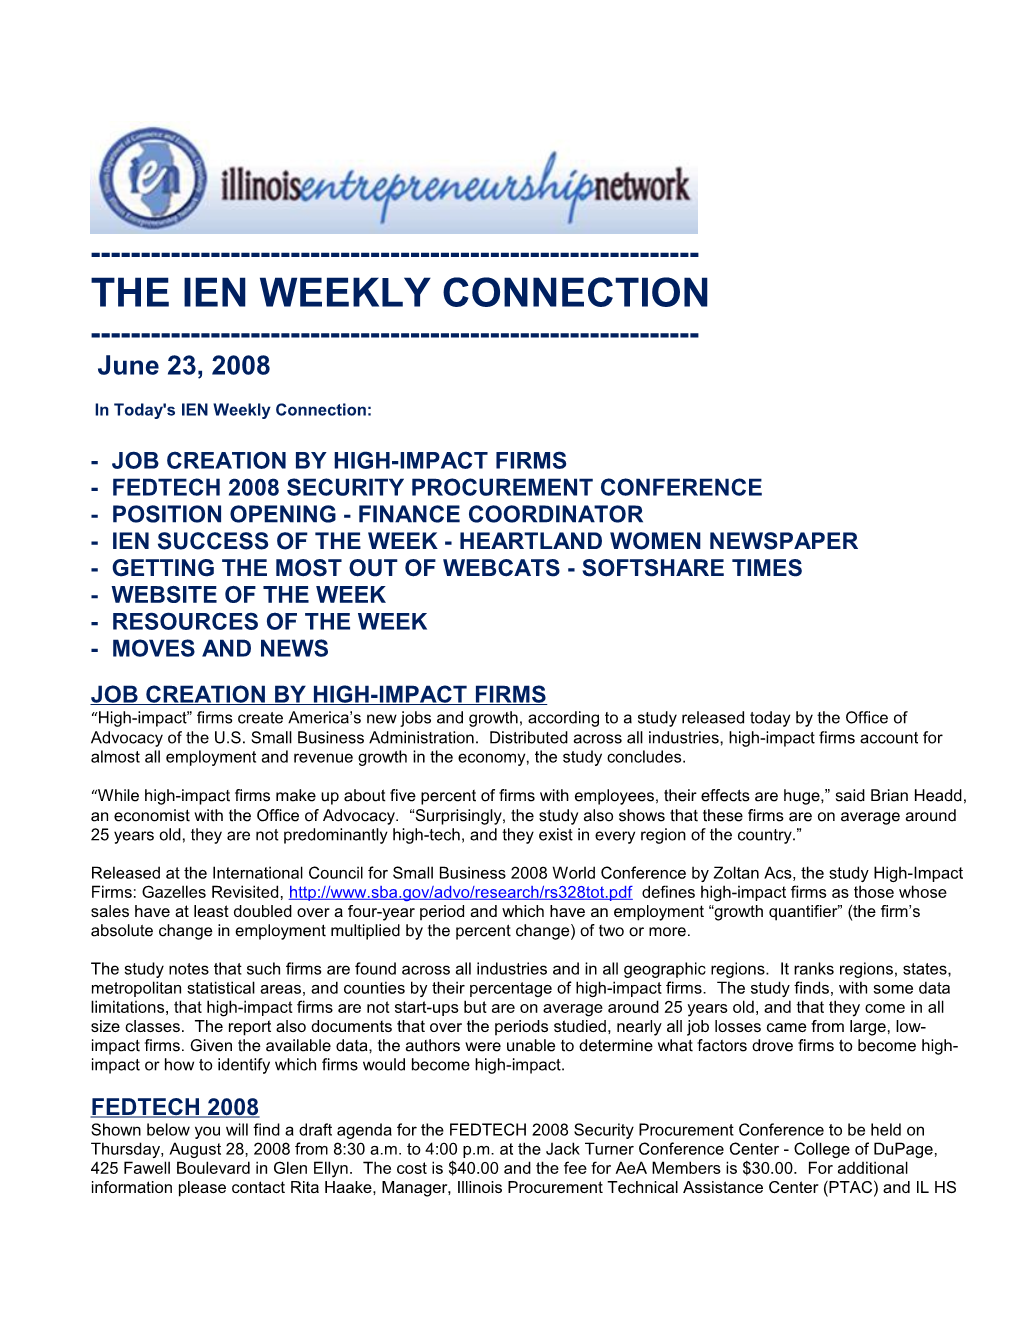 In Today'sien Weekly Connection s7